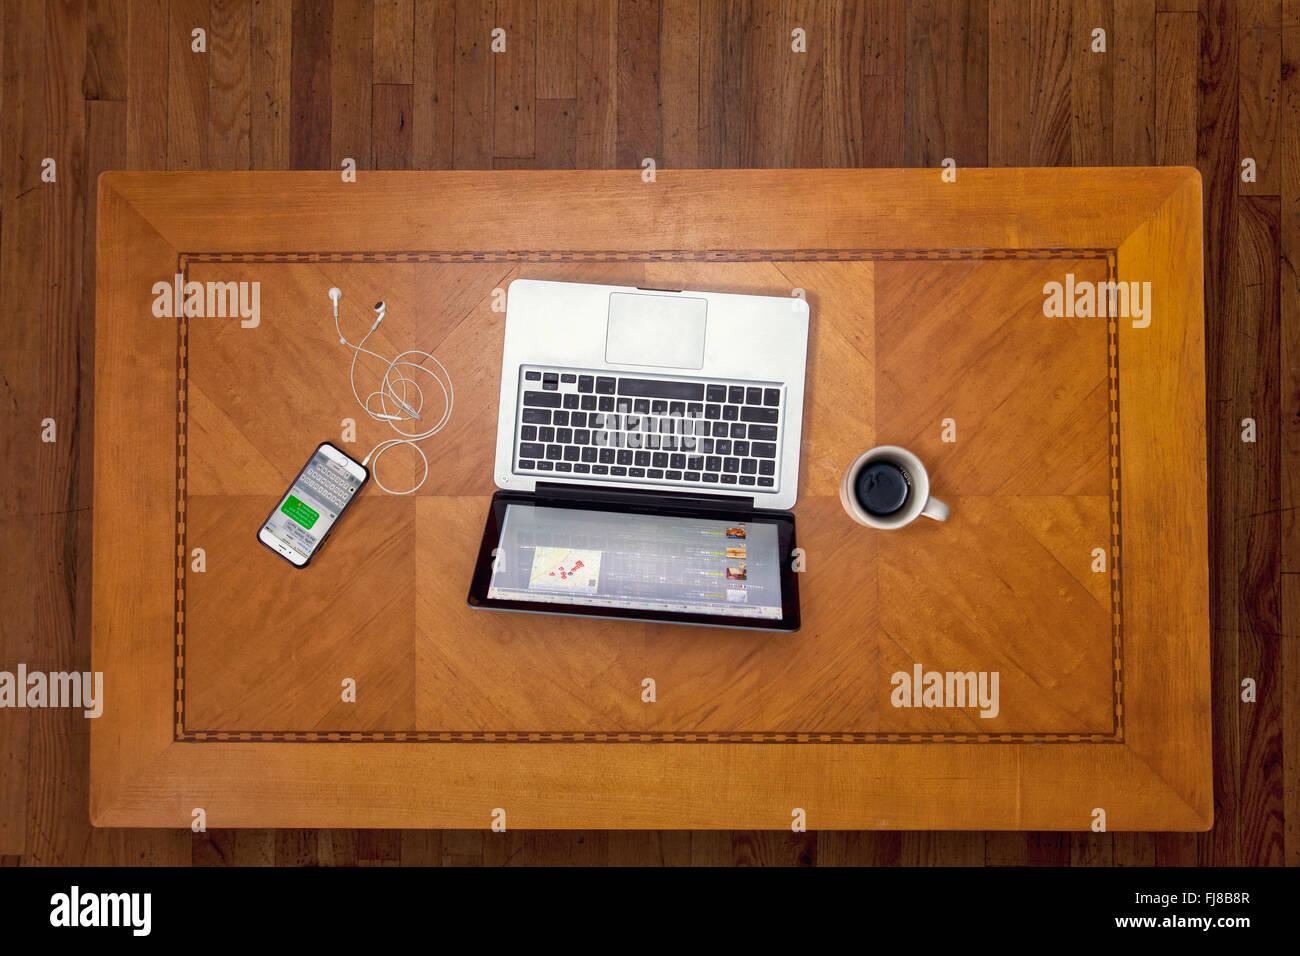 Looking down on an art deco table top with a laptop computer,iphone and cup of coffee. Stock Photo